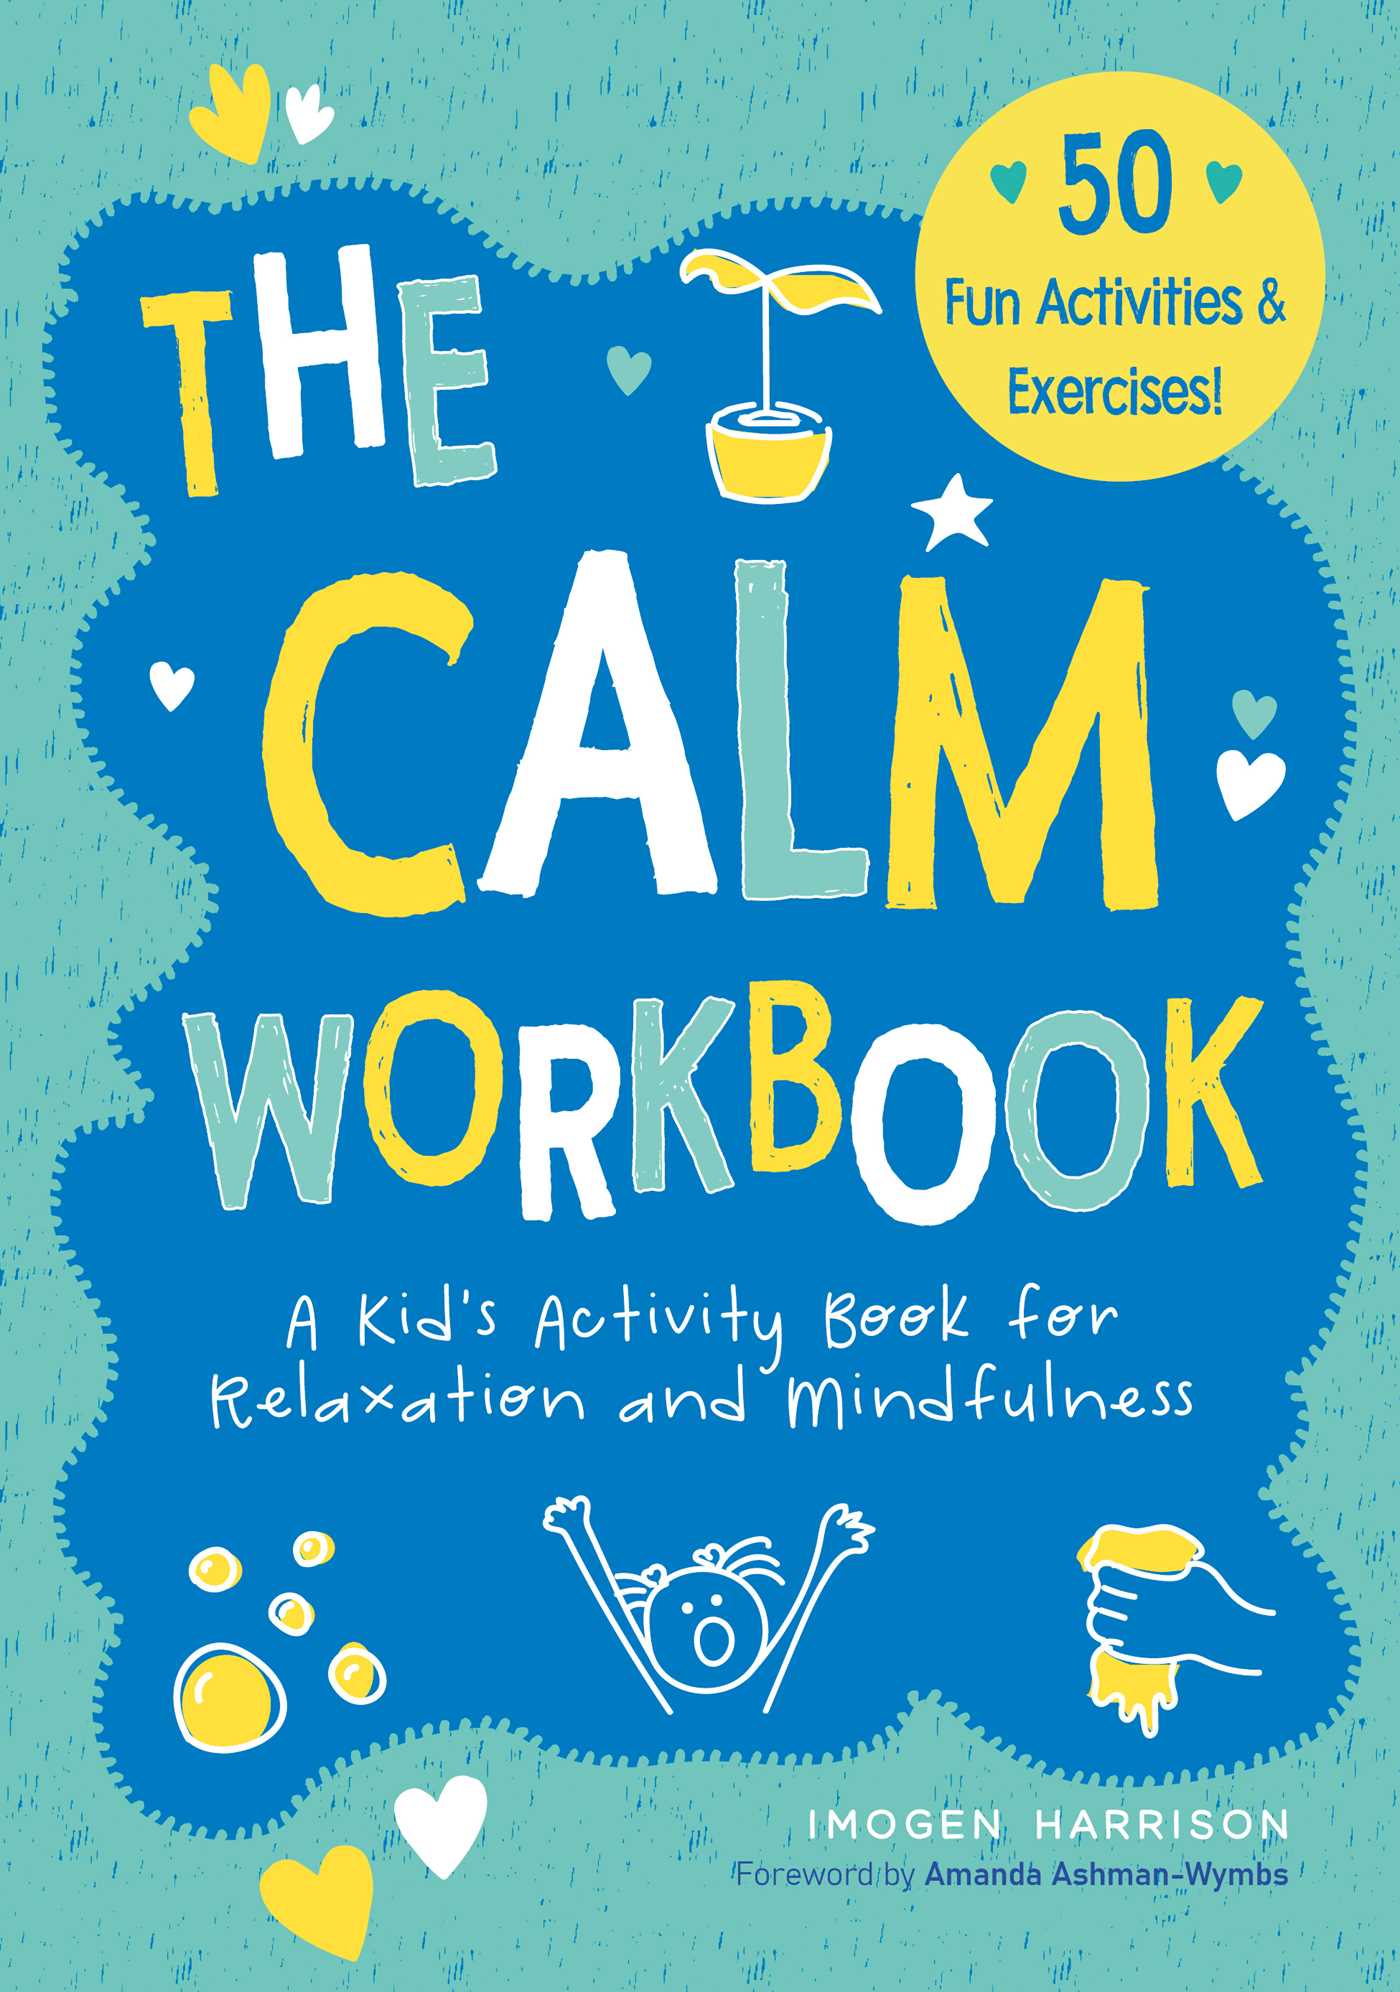 The Calm Workbook : A Kid's Activity Book for Relaxation and Mindfulness | Harrison, Imogen